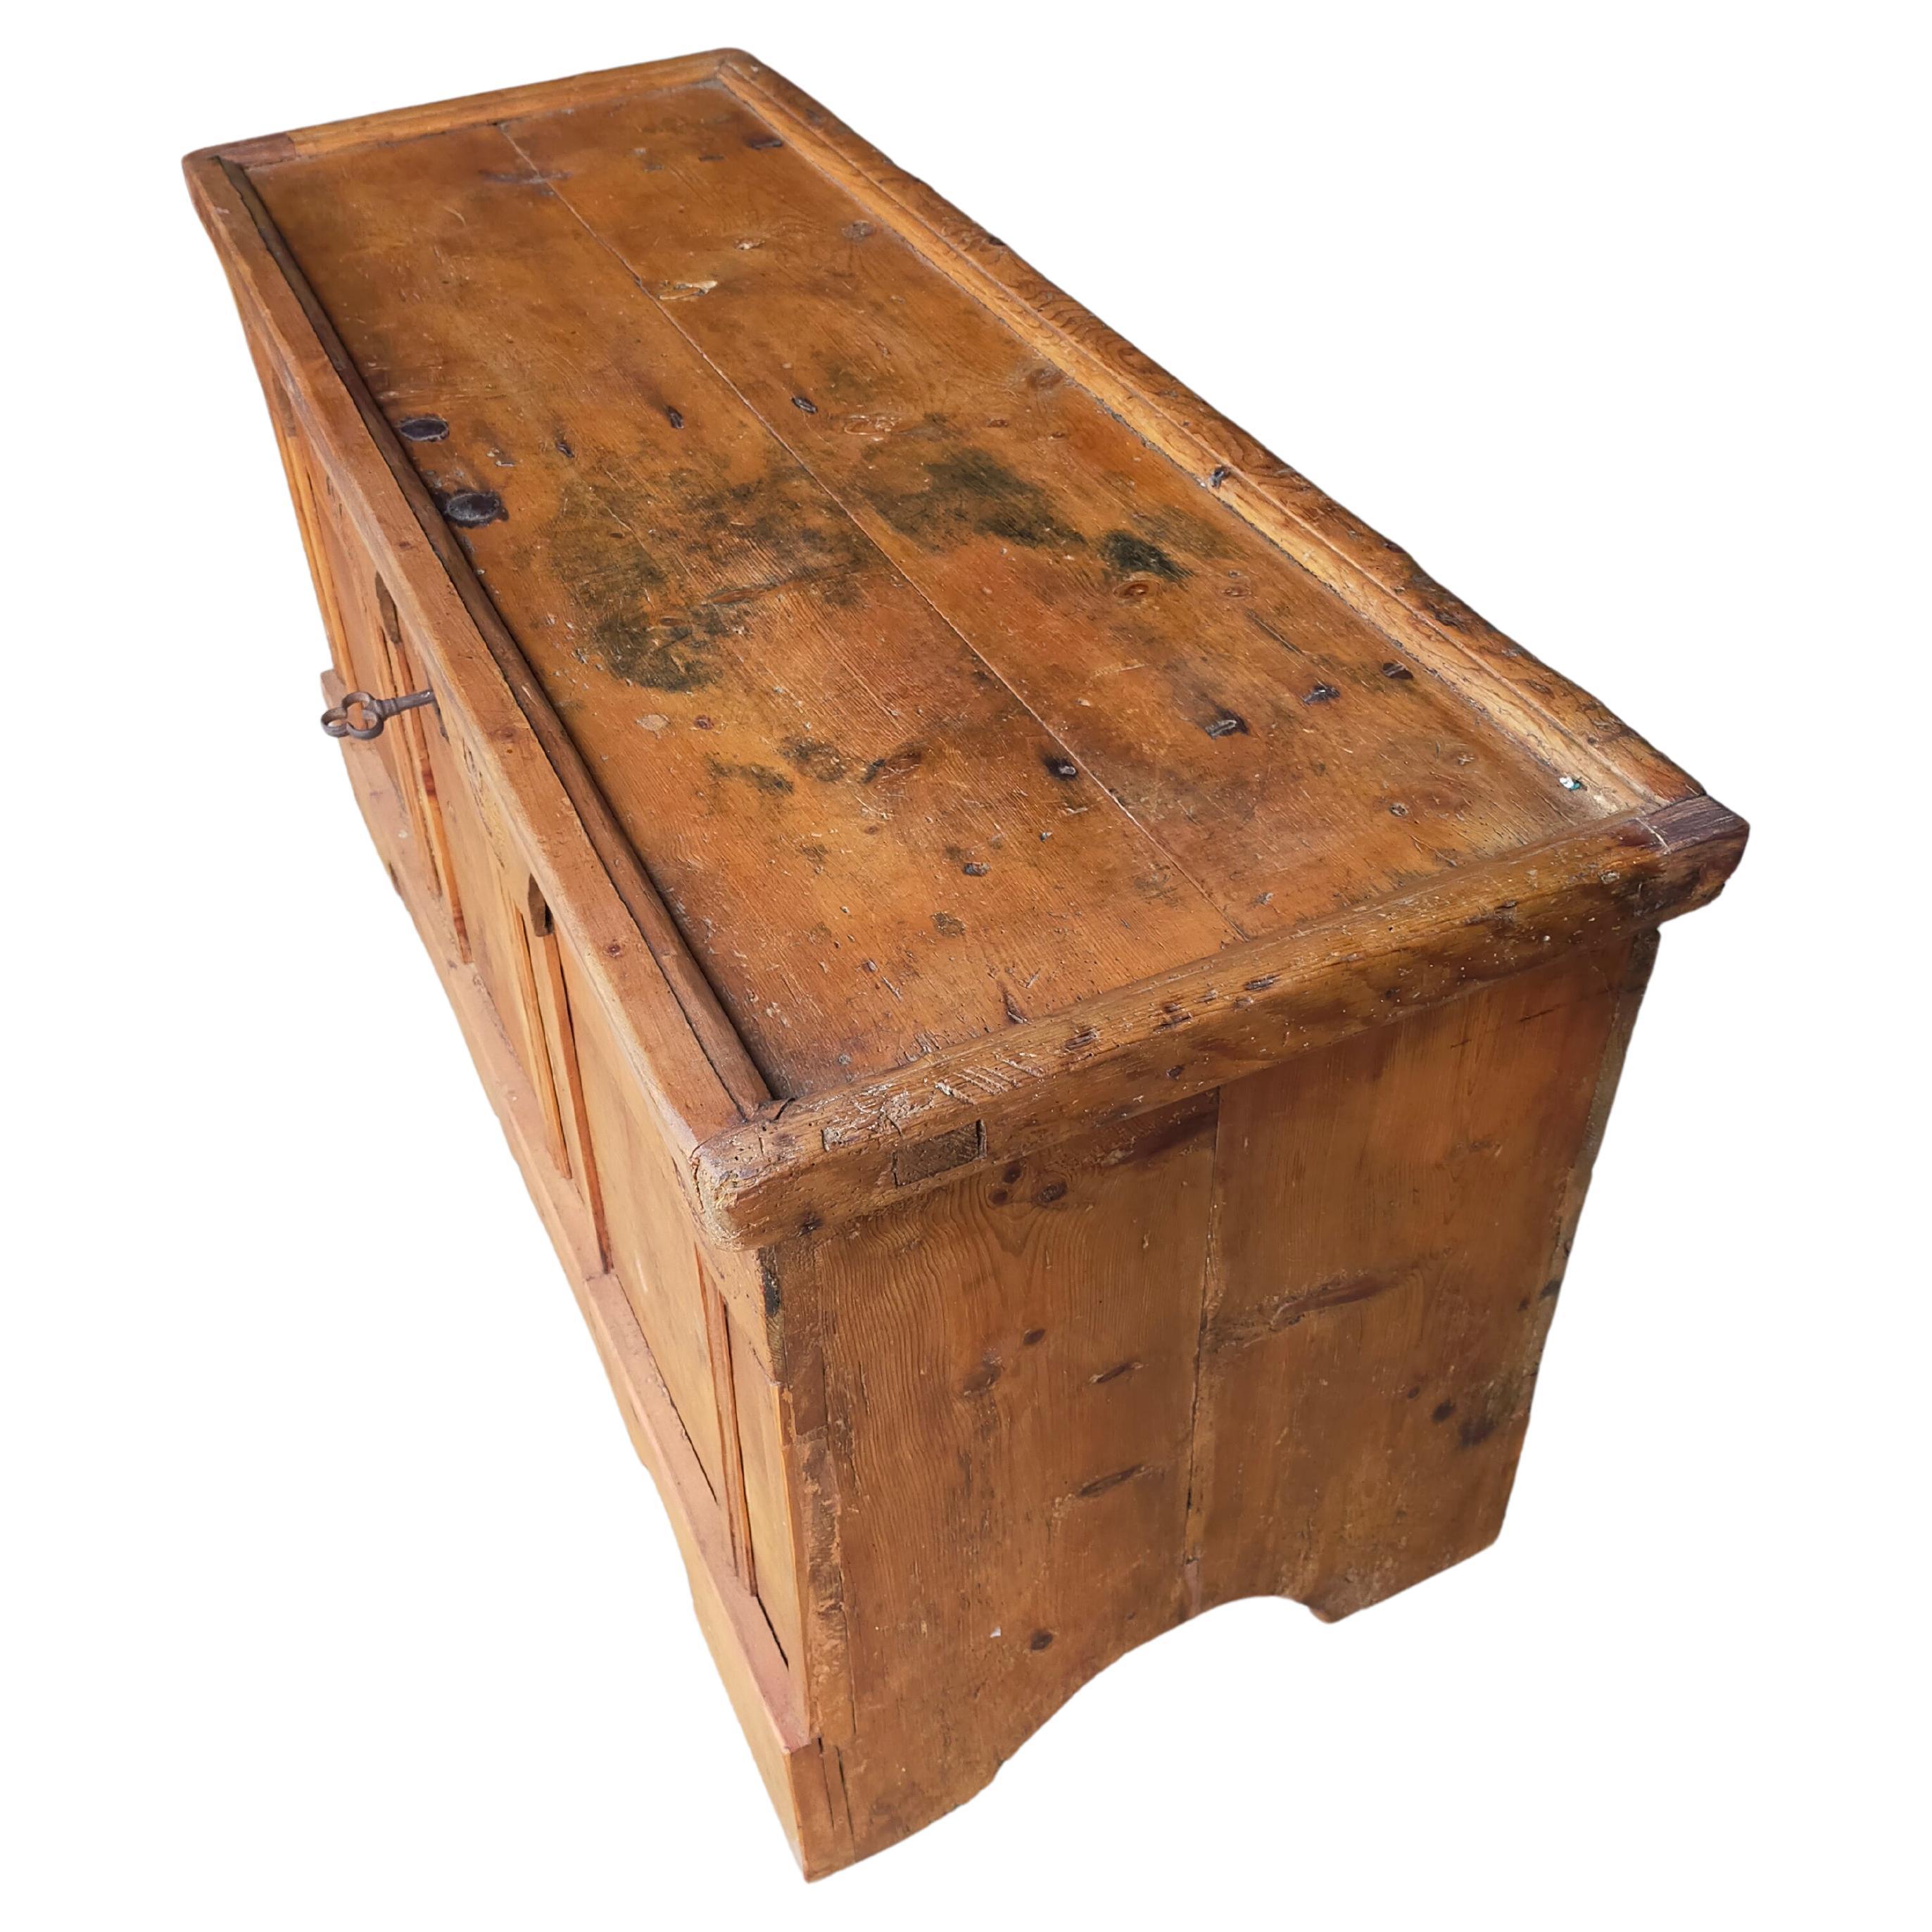 Stone pine wedding chest, up to the 1700s